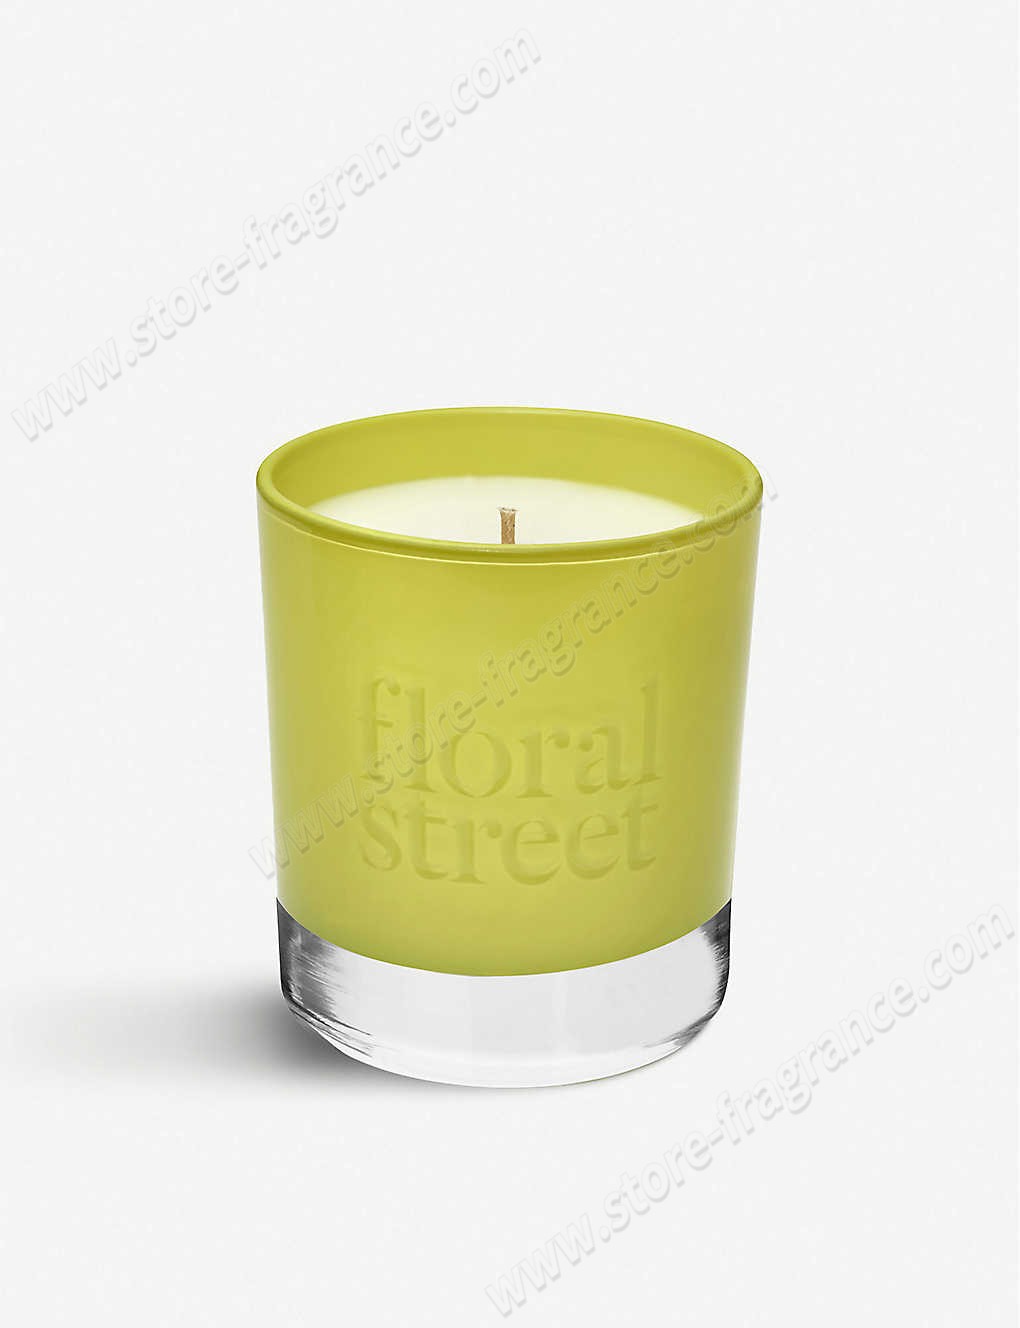 FLORAL STREET/Spring Bouquet scented candle 200g ✿ Discount Store - FLORAL STREET/Spring Bouquet scented candle 200g ✿ Discount Store